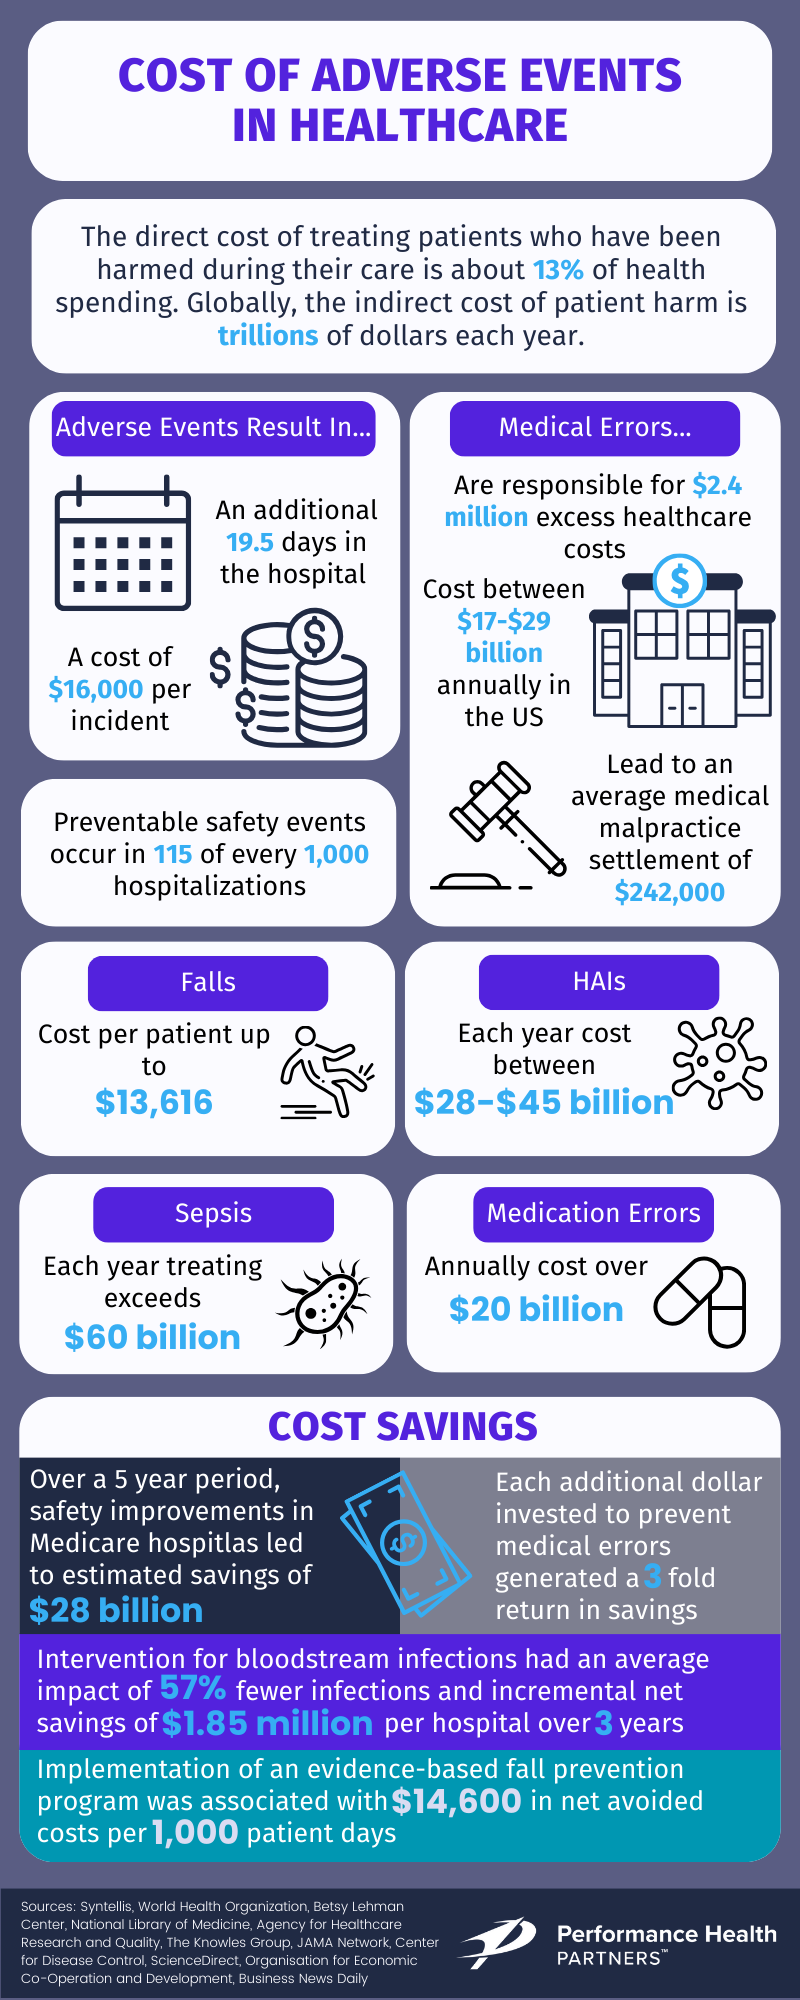 Cost of Adverse Events Infographic